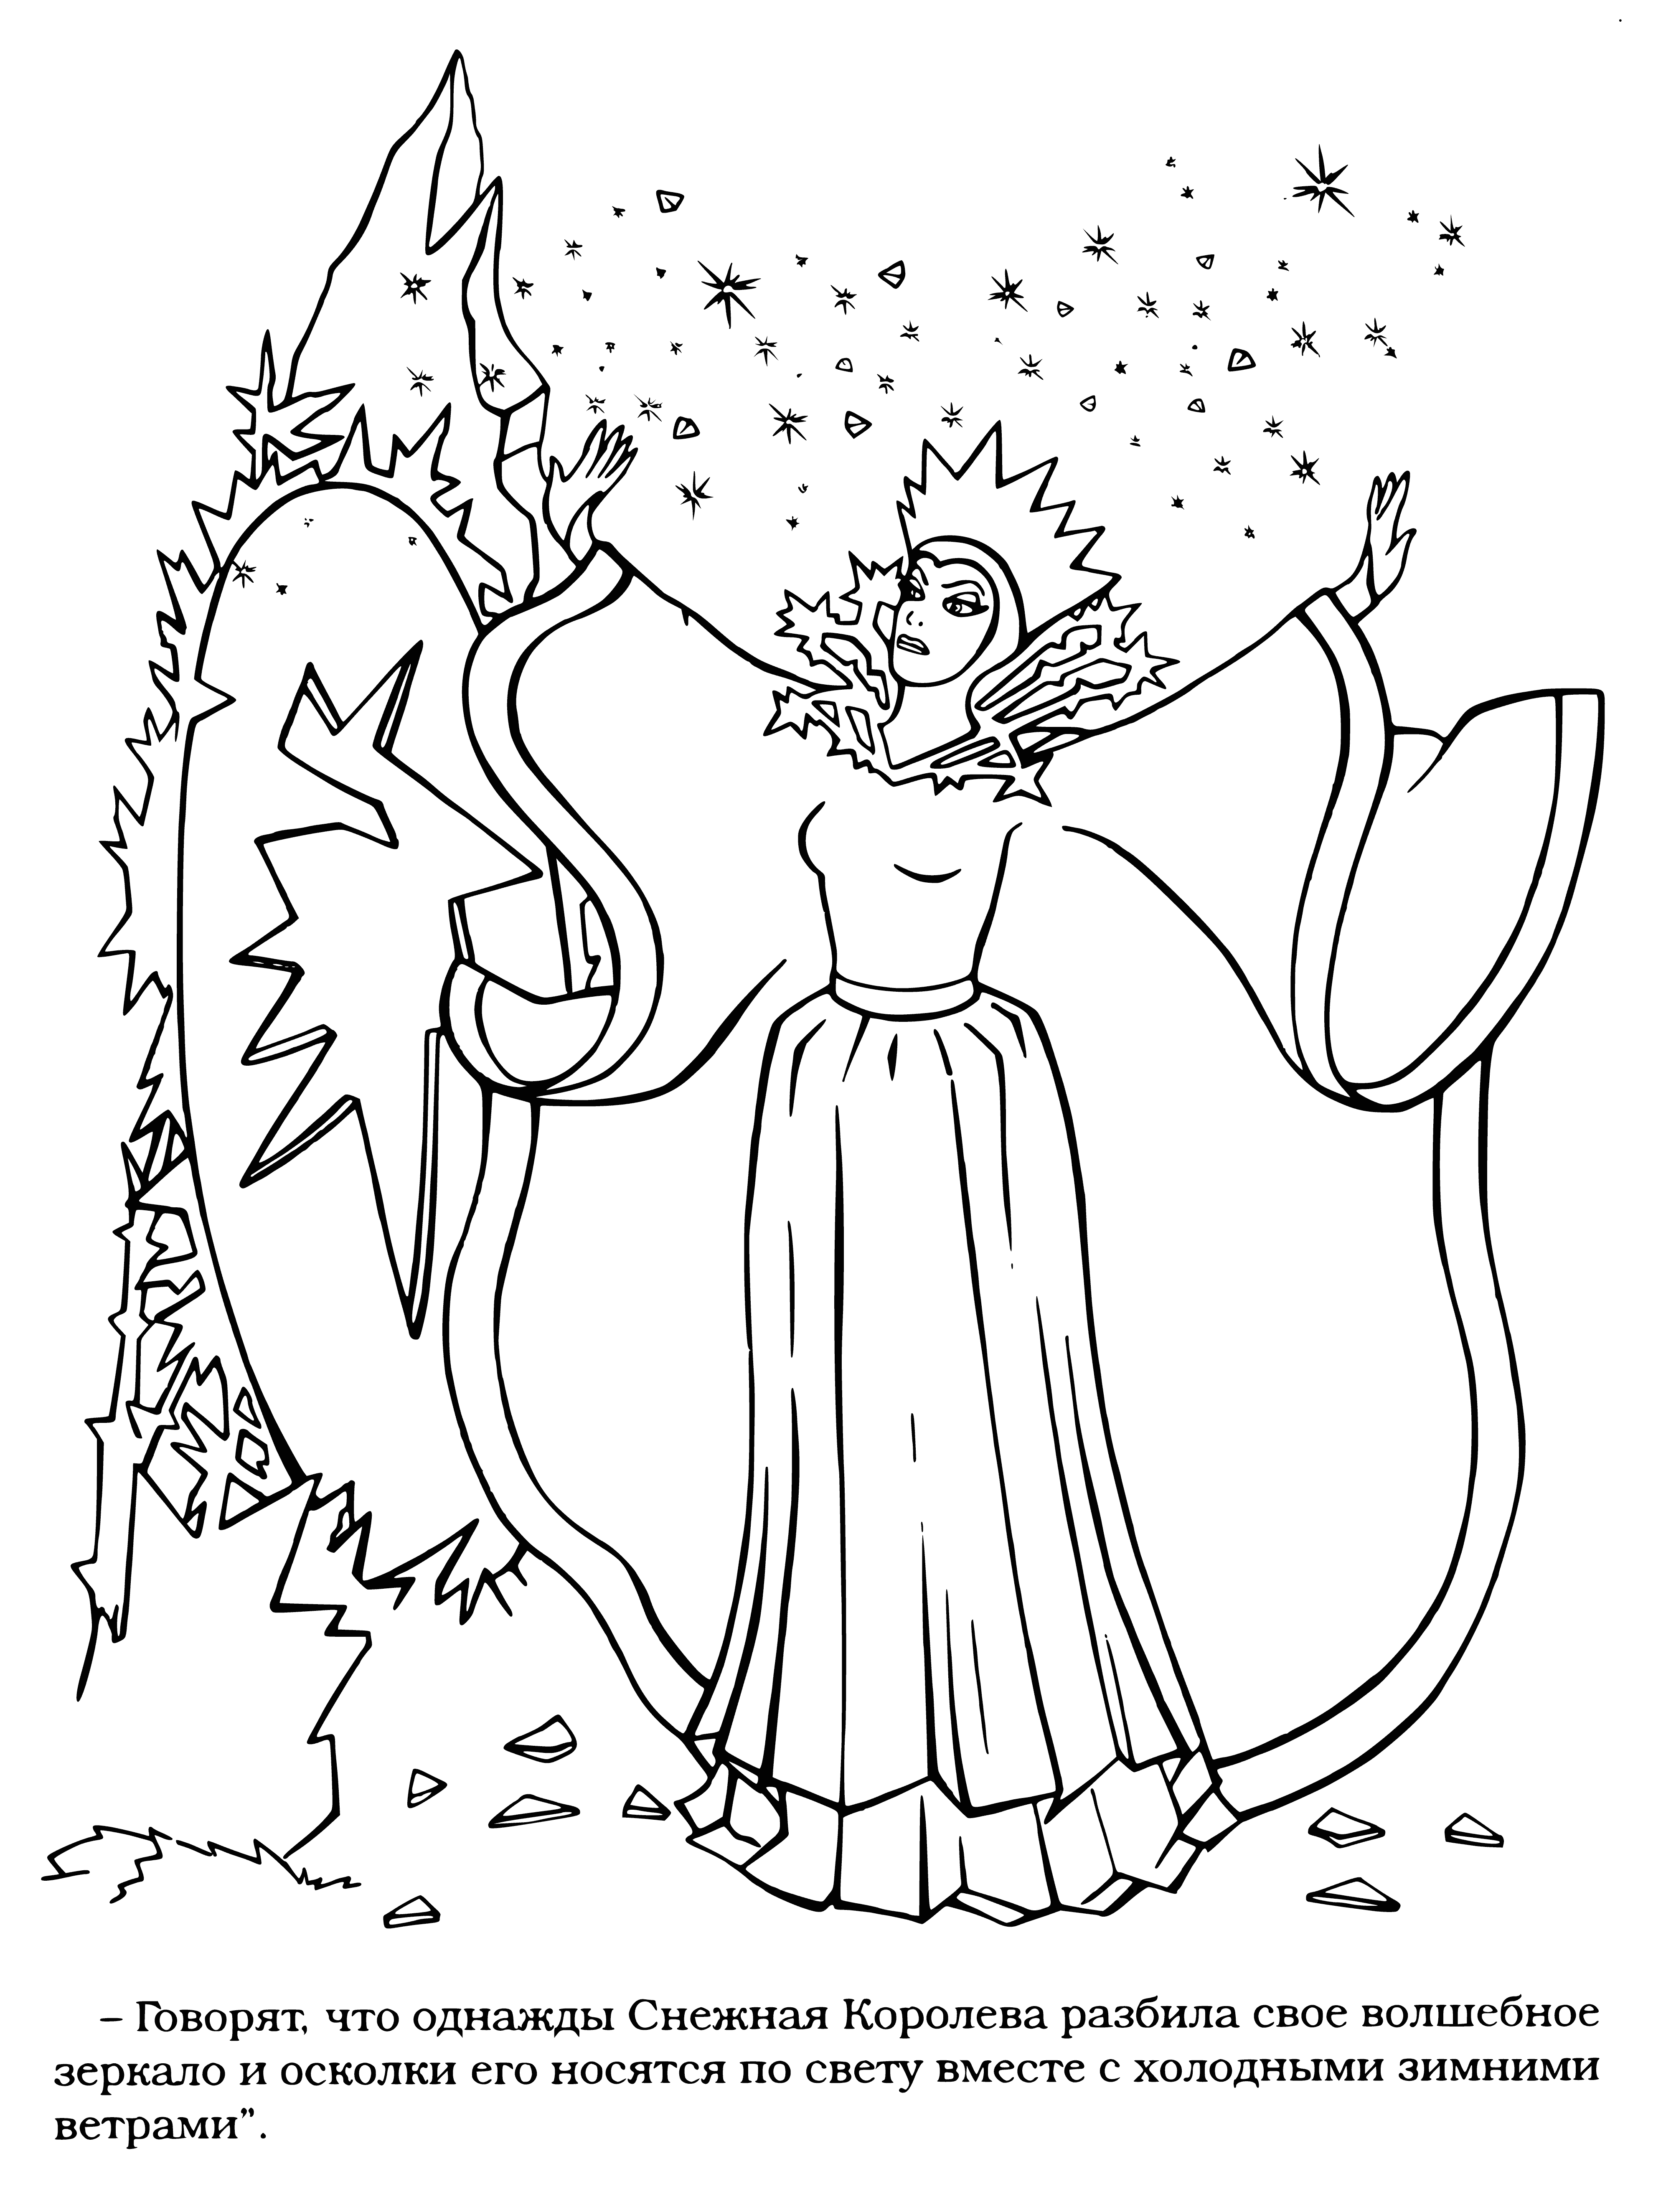 coloring page: Old man in brown coat with white hair & beard holds staff, looks in snowflake-covered mirror with door in center.